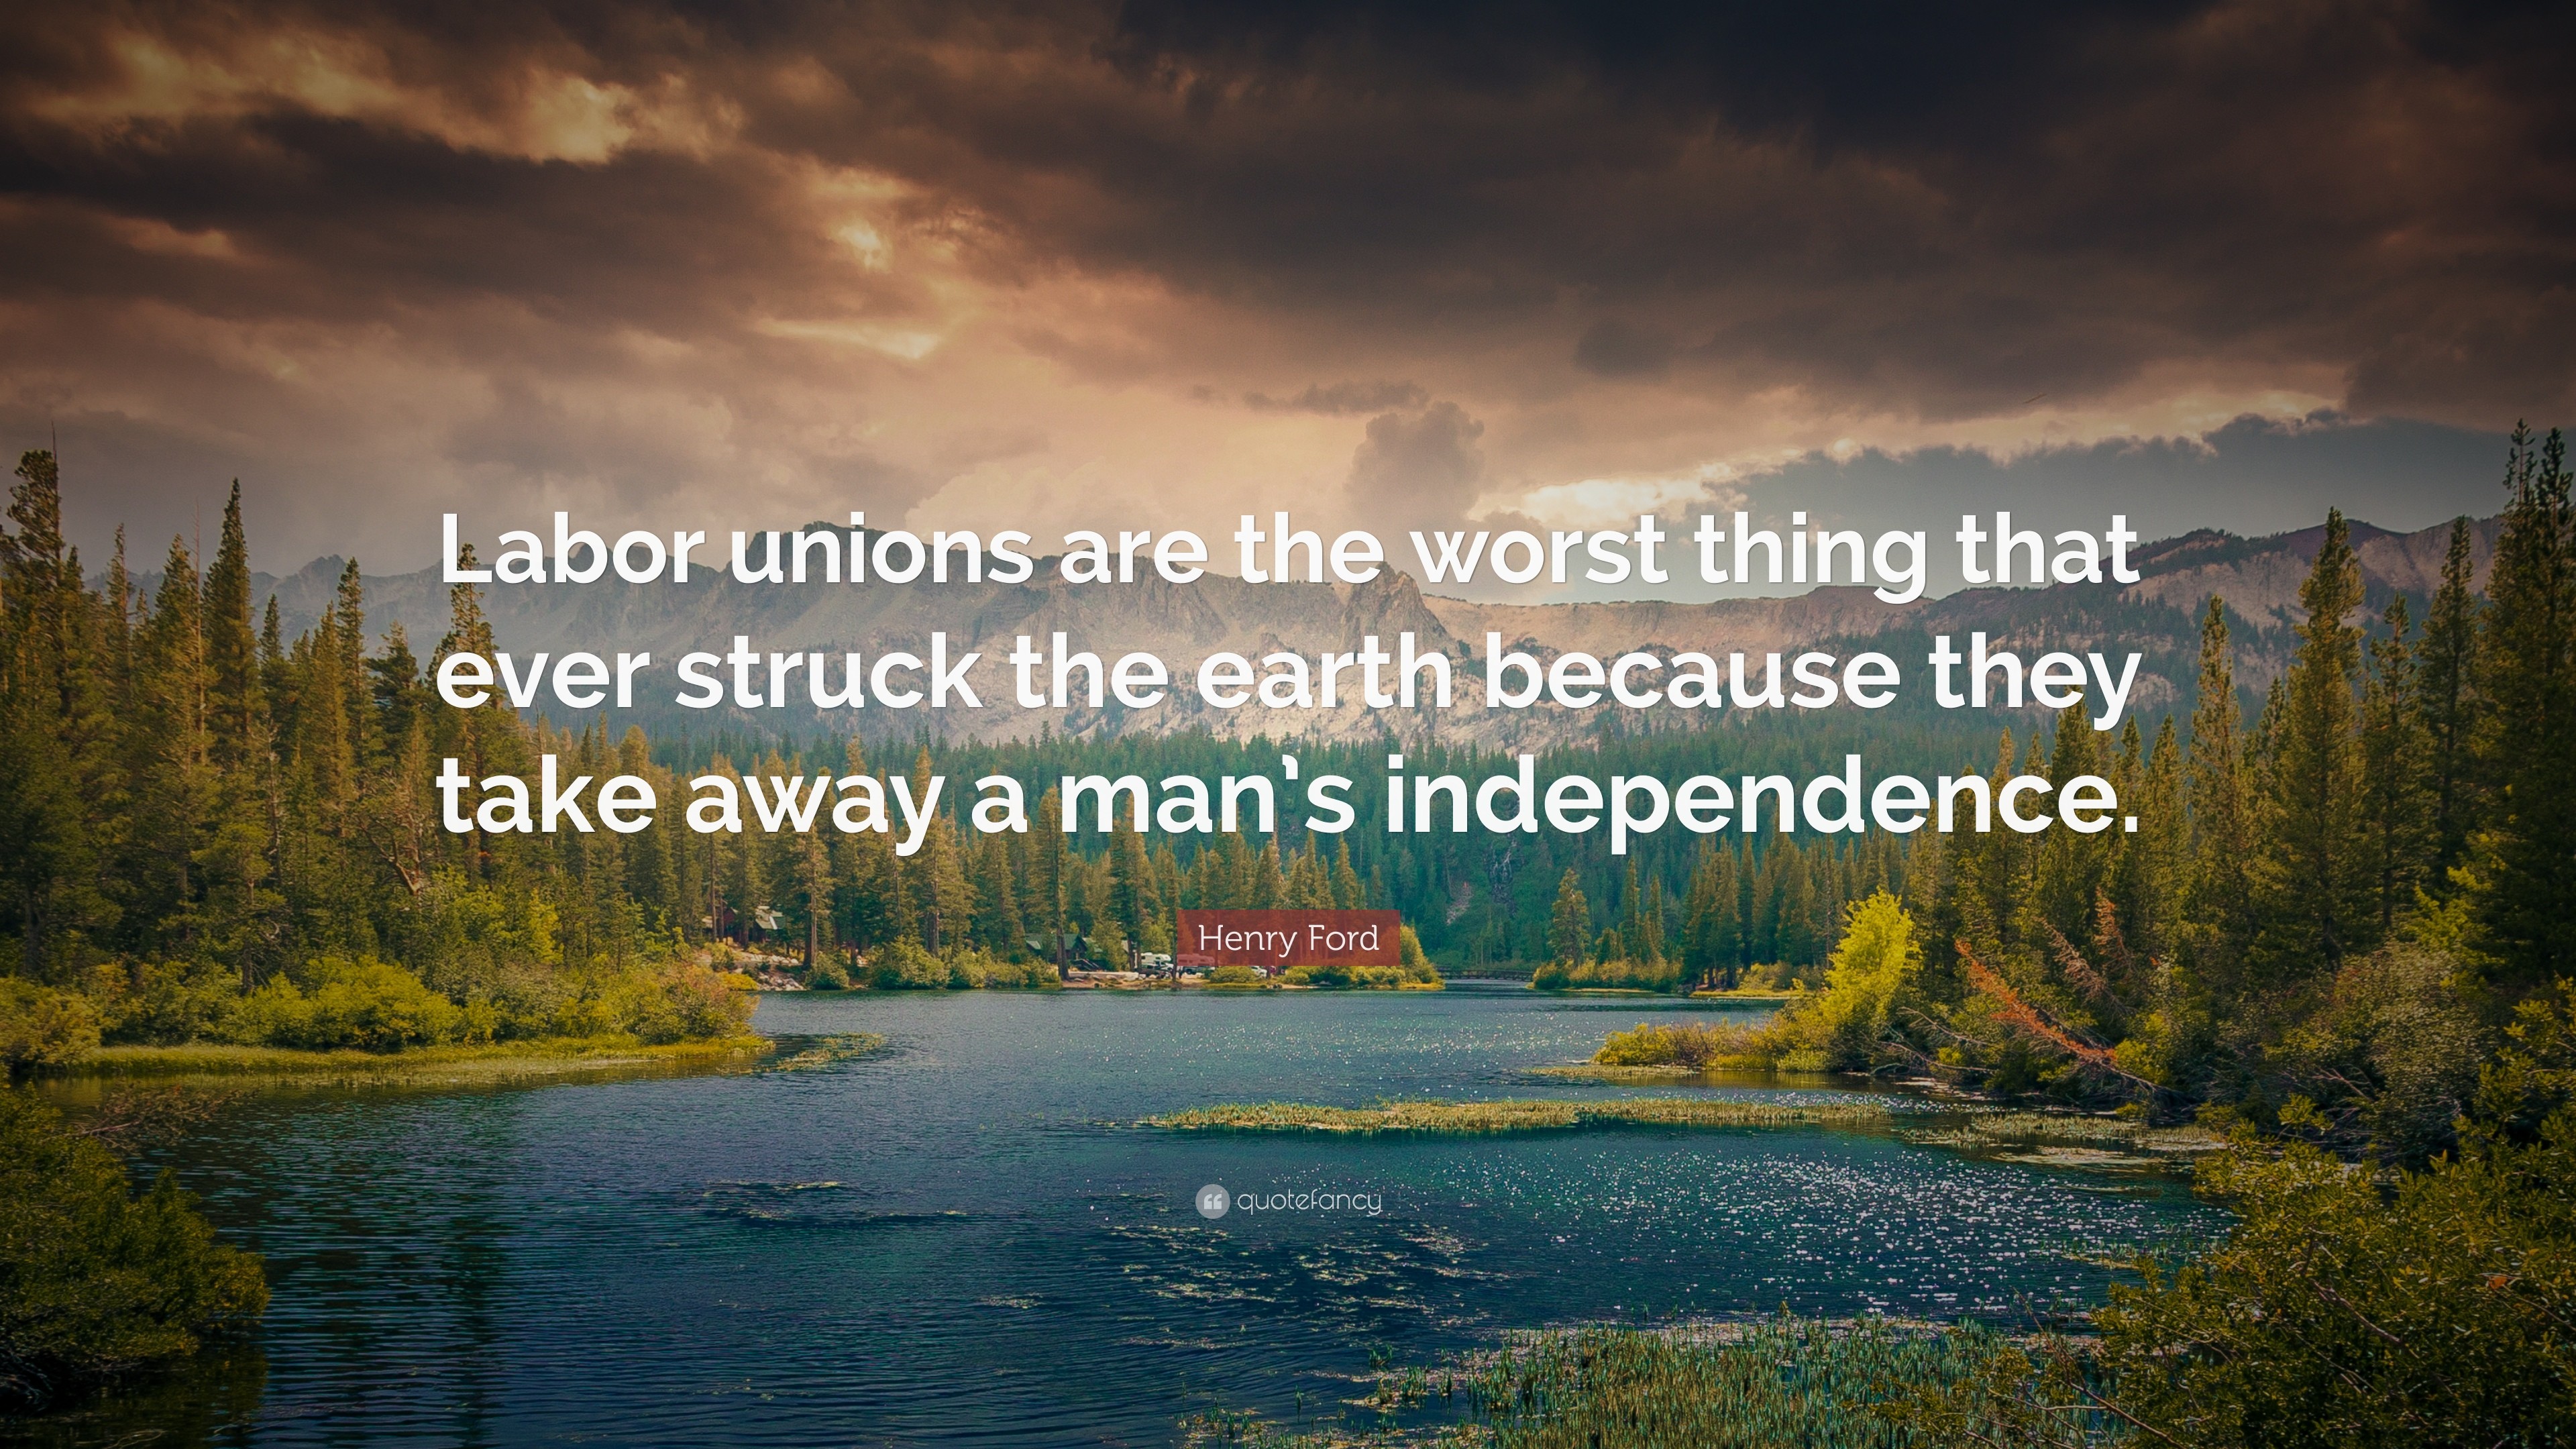 3840x2160 Henry Ford Quote: “Labor unions are the worst thing that ever struck the  earth